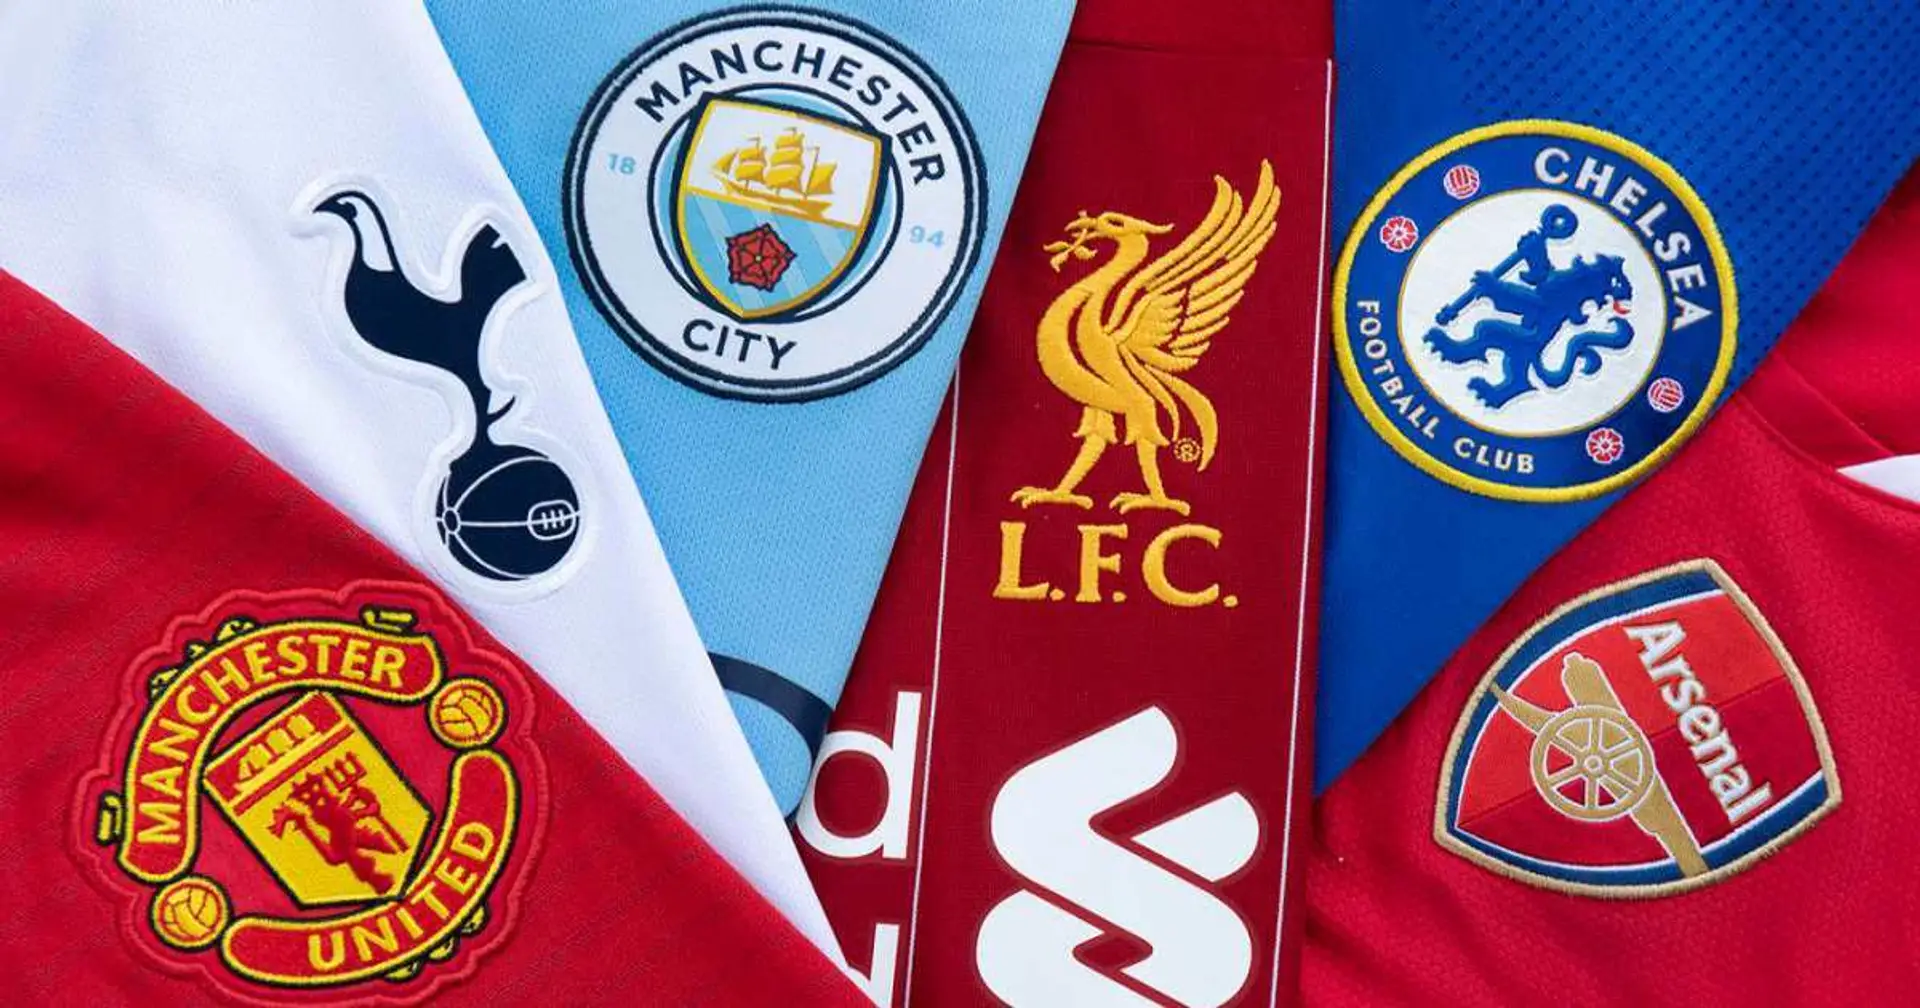 EPL season unfolds with intense competition among top teams